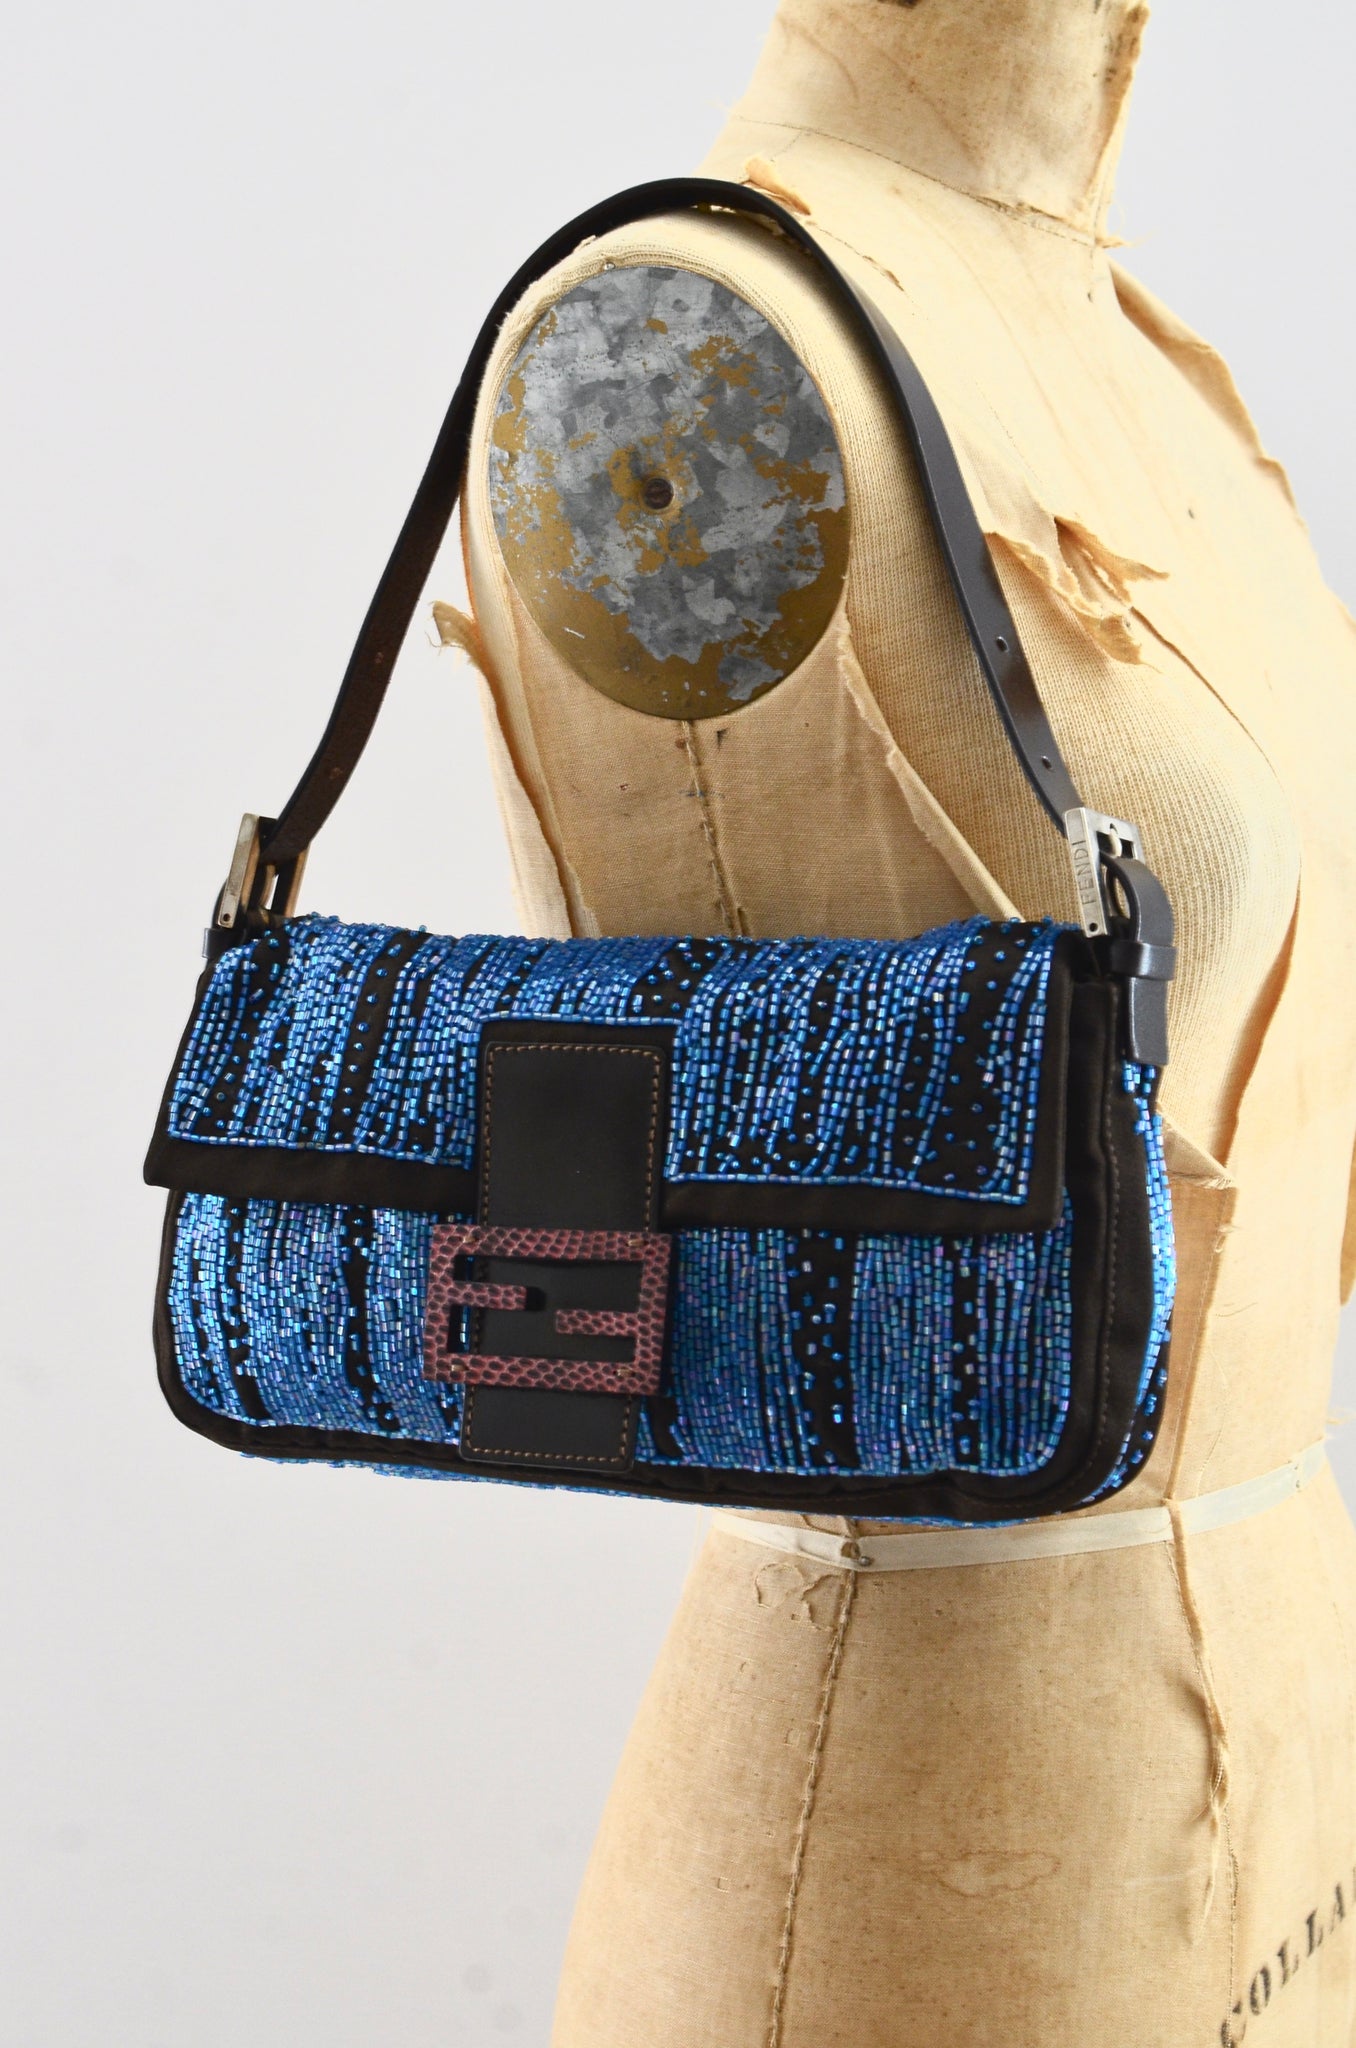 RARE Vintage Fendi Beaded Beaded Baguette Bag With Leather Strap